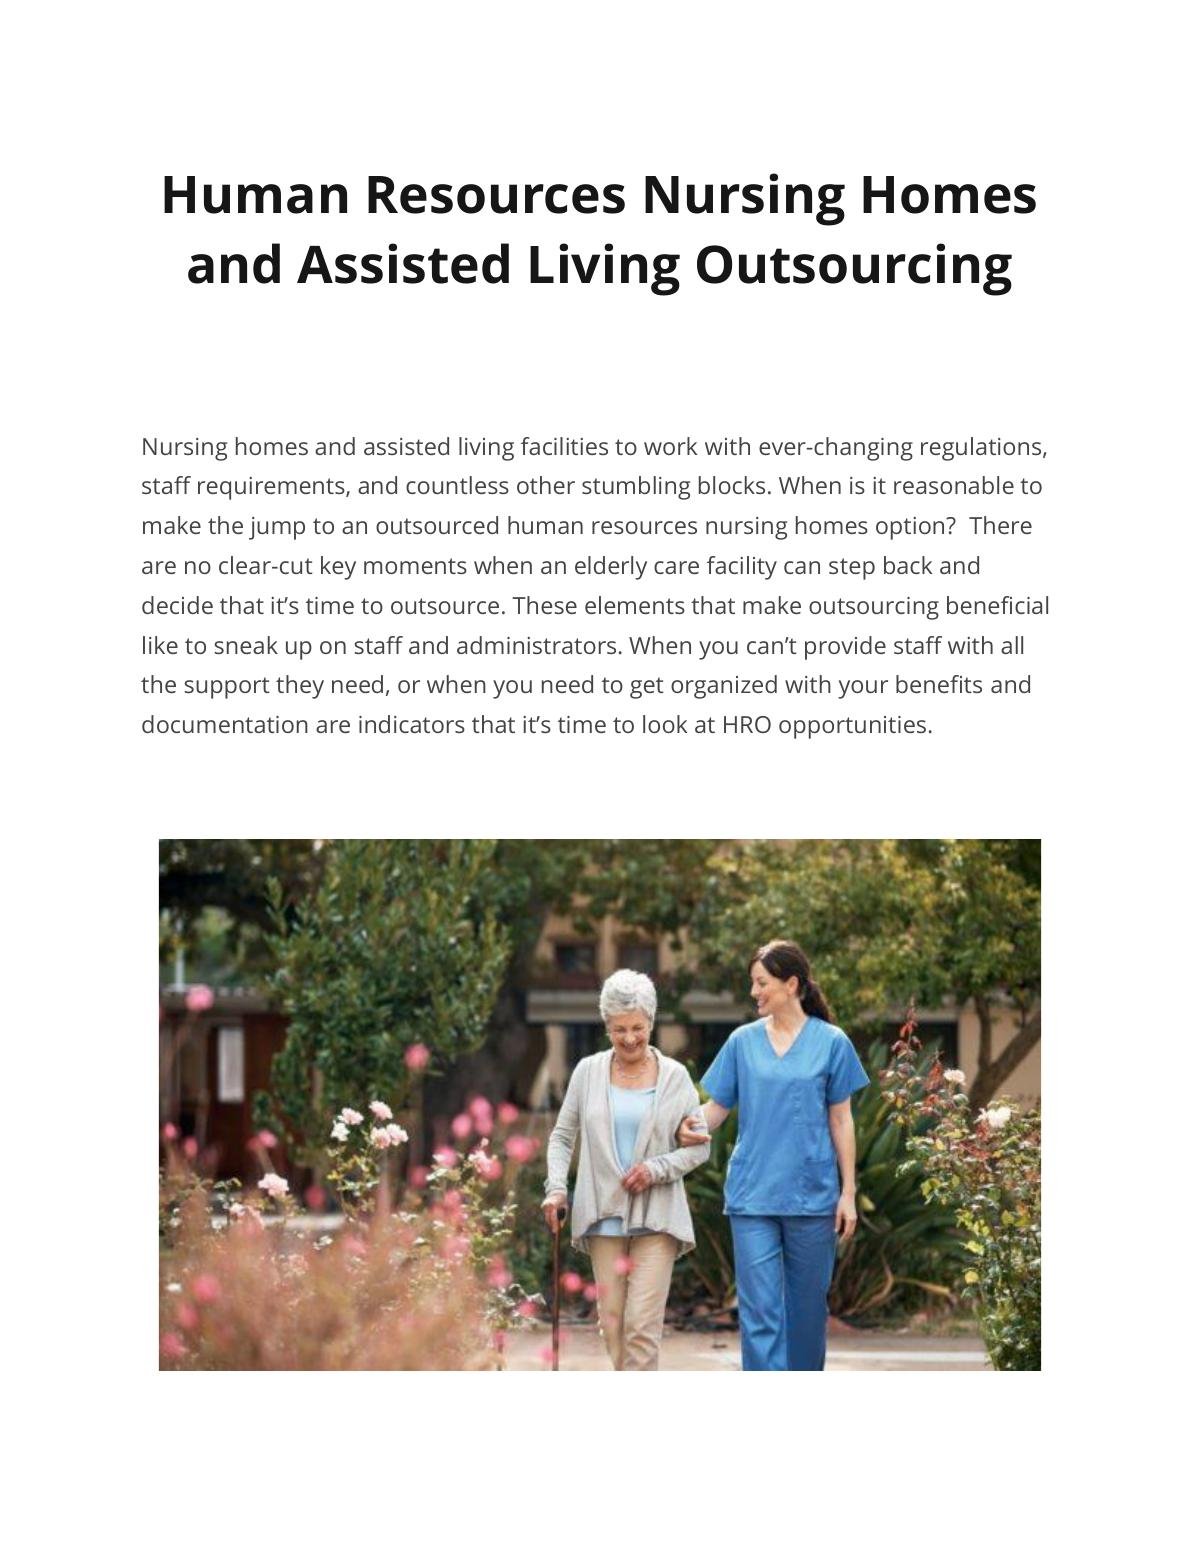 Human Resources Nursing Homes and Assisted Living Outsourcing 